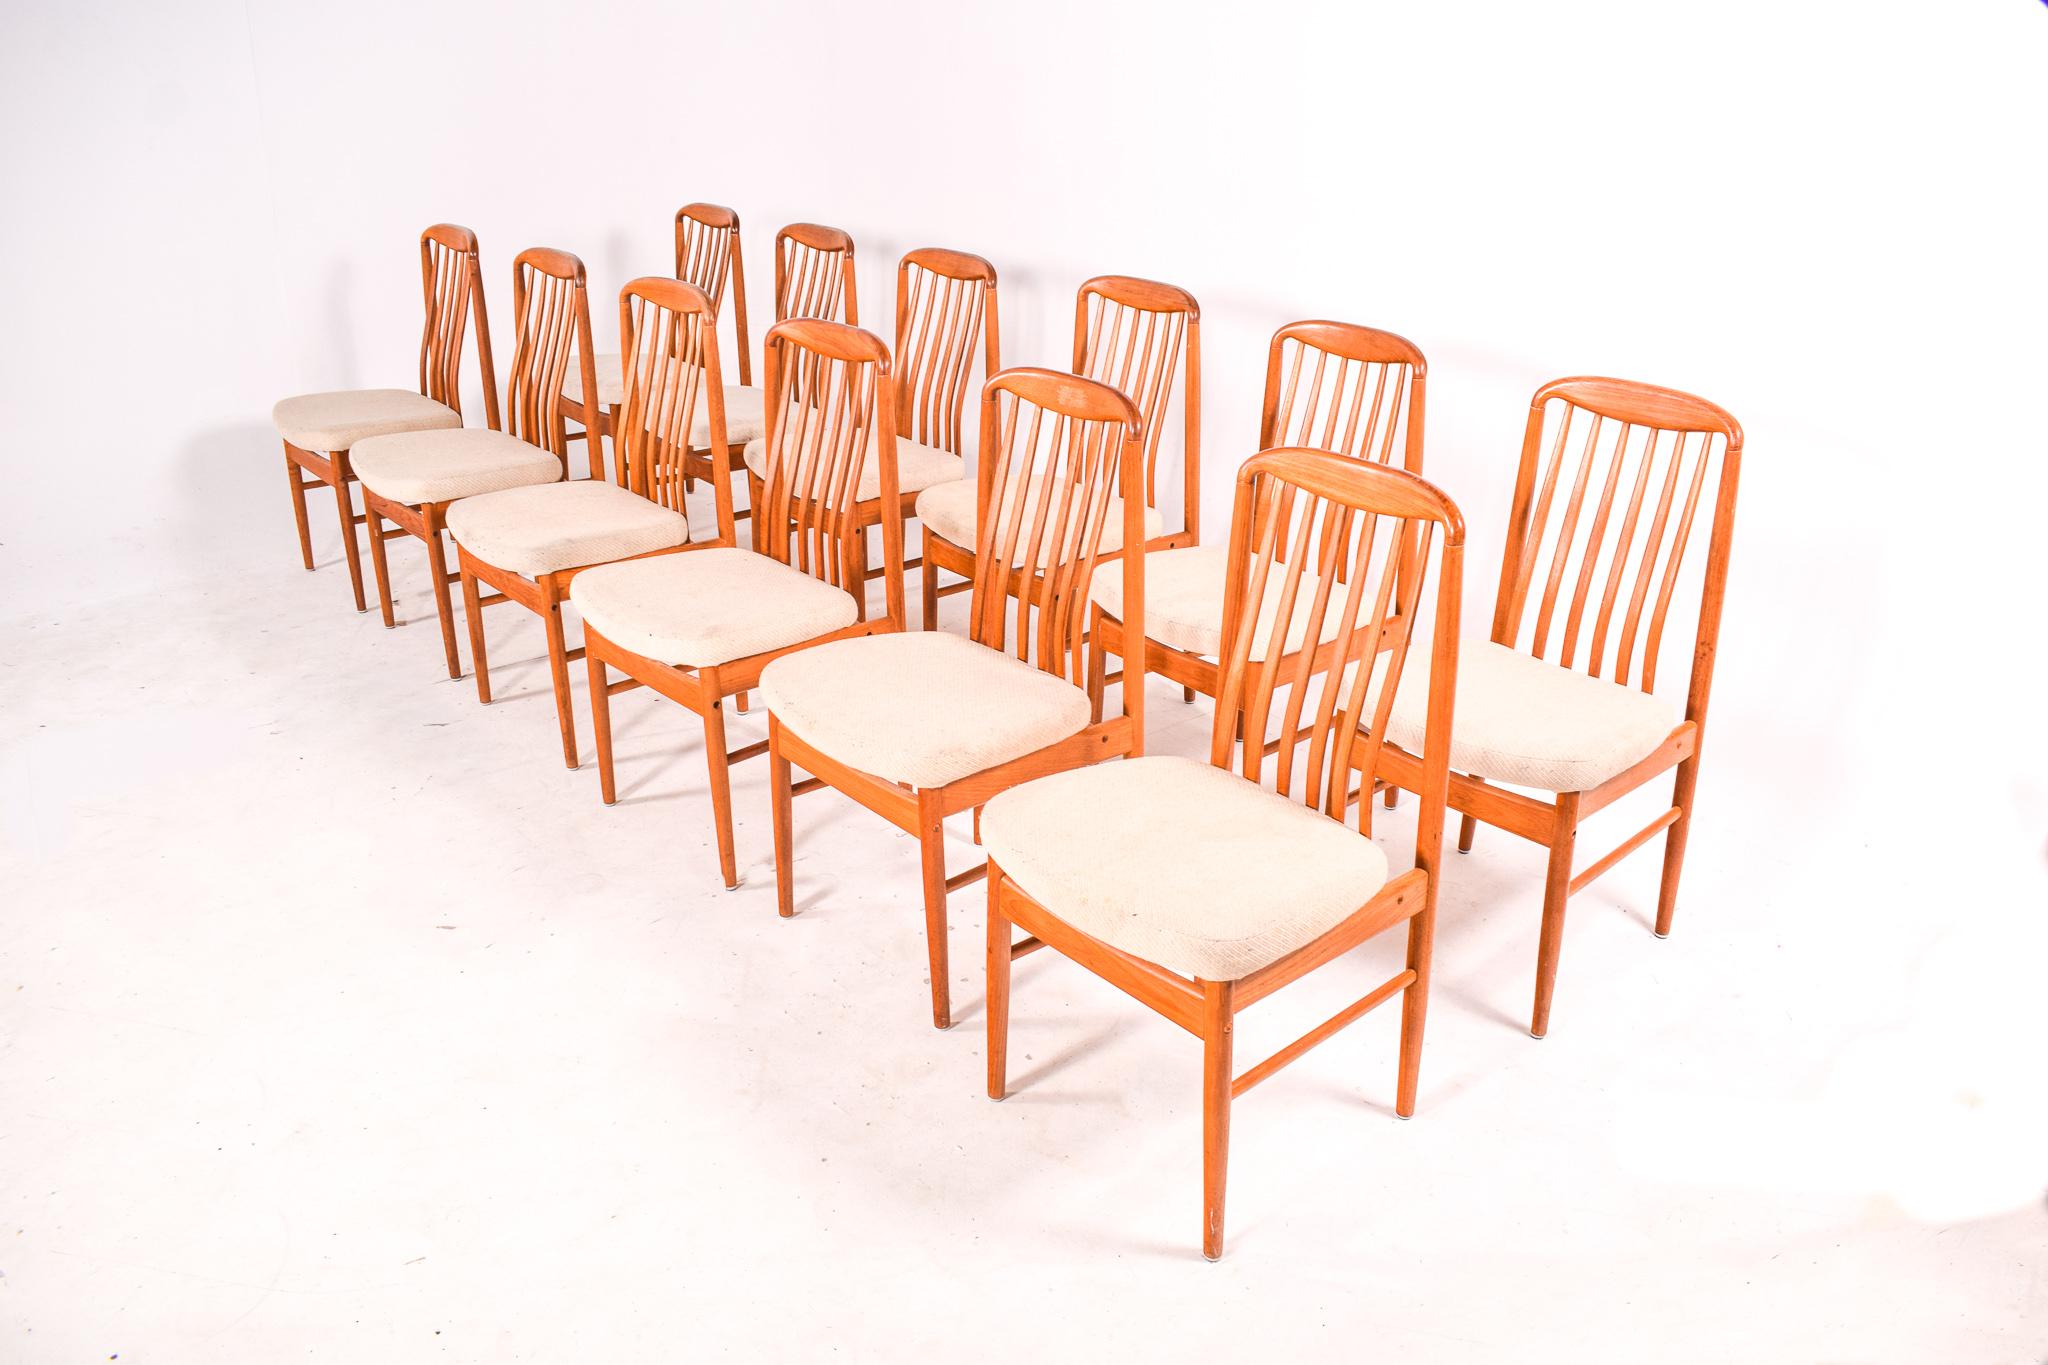 This set of twelve BL10 Sanne chairs, designed in the 1970s by Danish designer Benny Linden, is a splendid example of Scandinavian design's influence extending beyond its borders, having been manufactured in Thailand. The chairs are a testament to